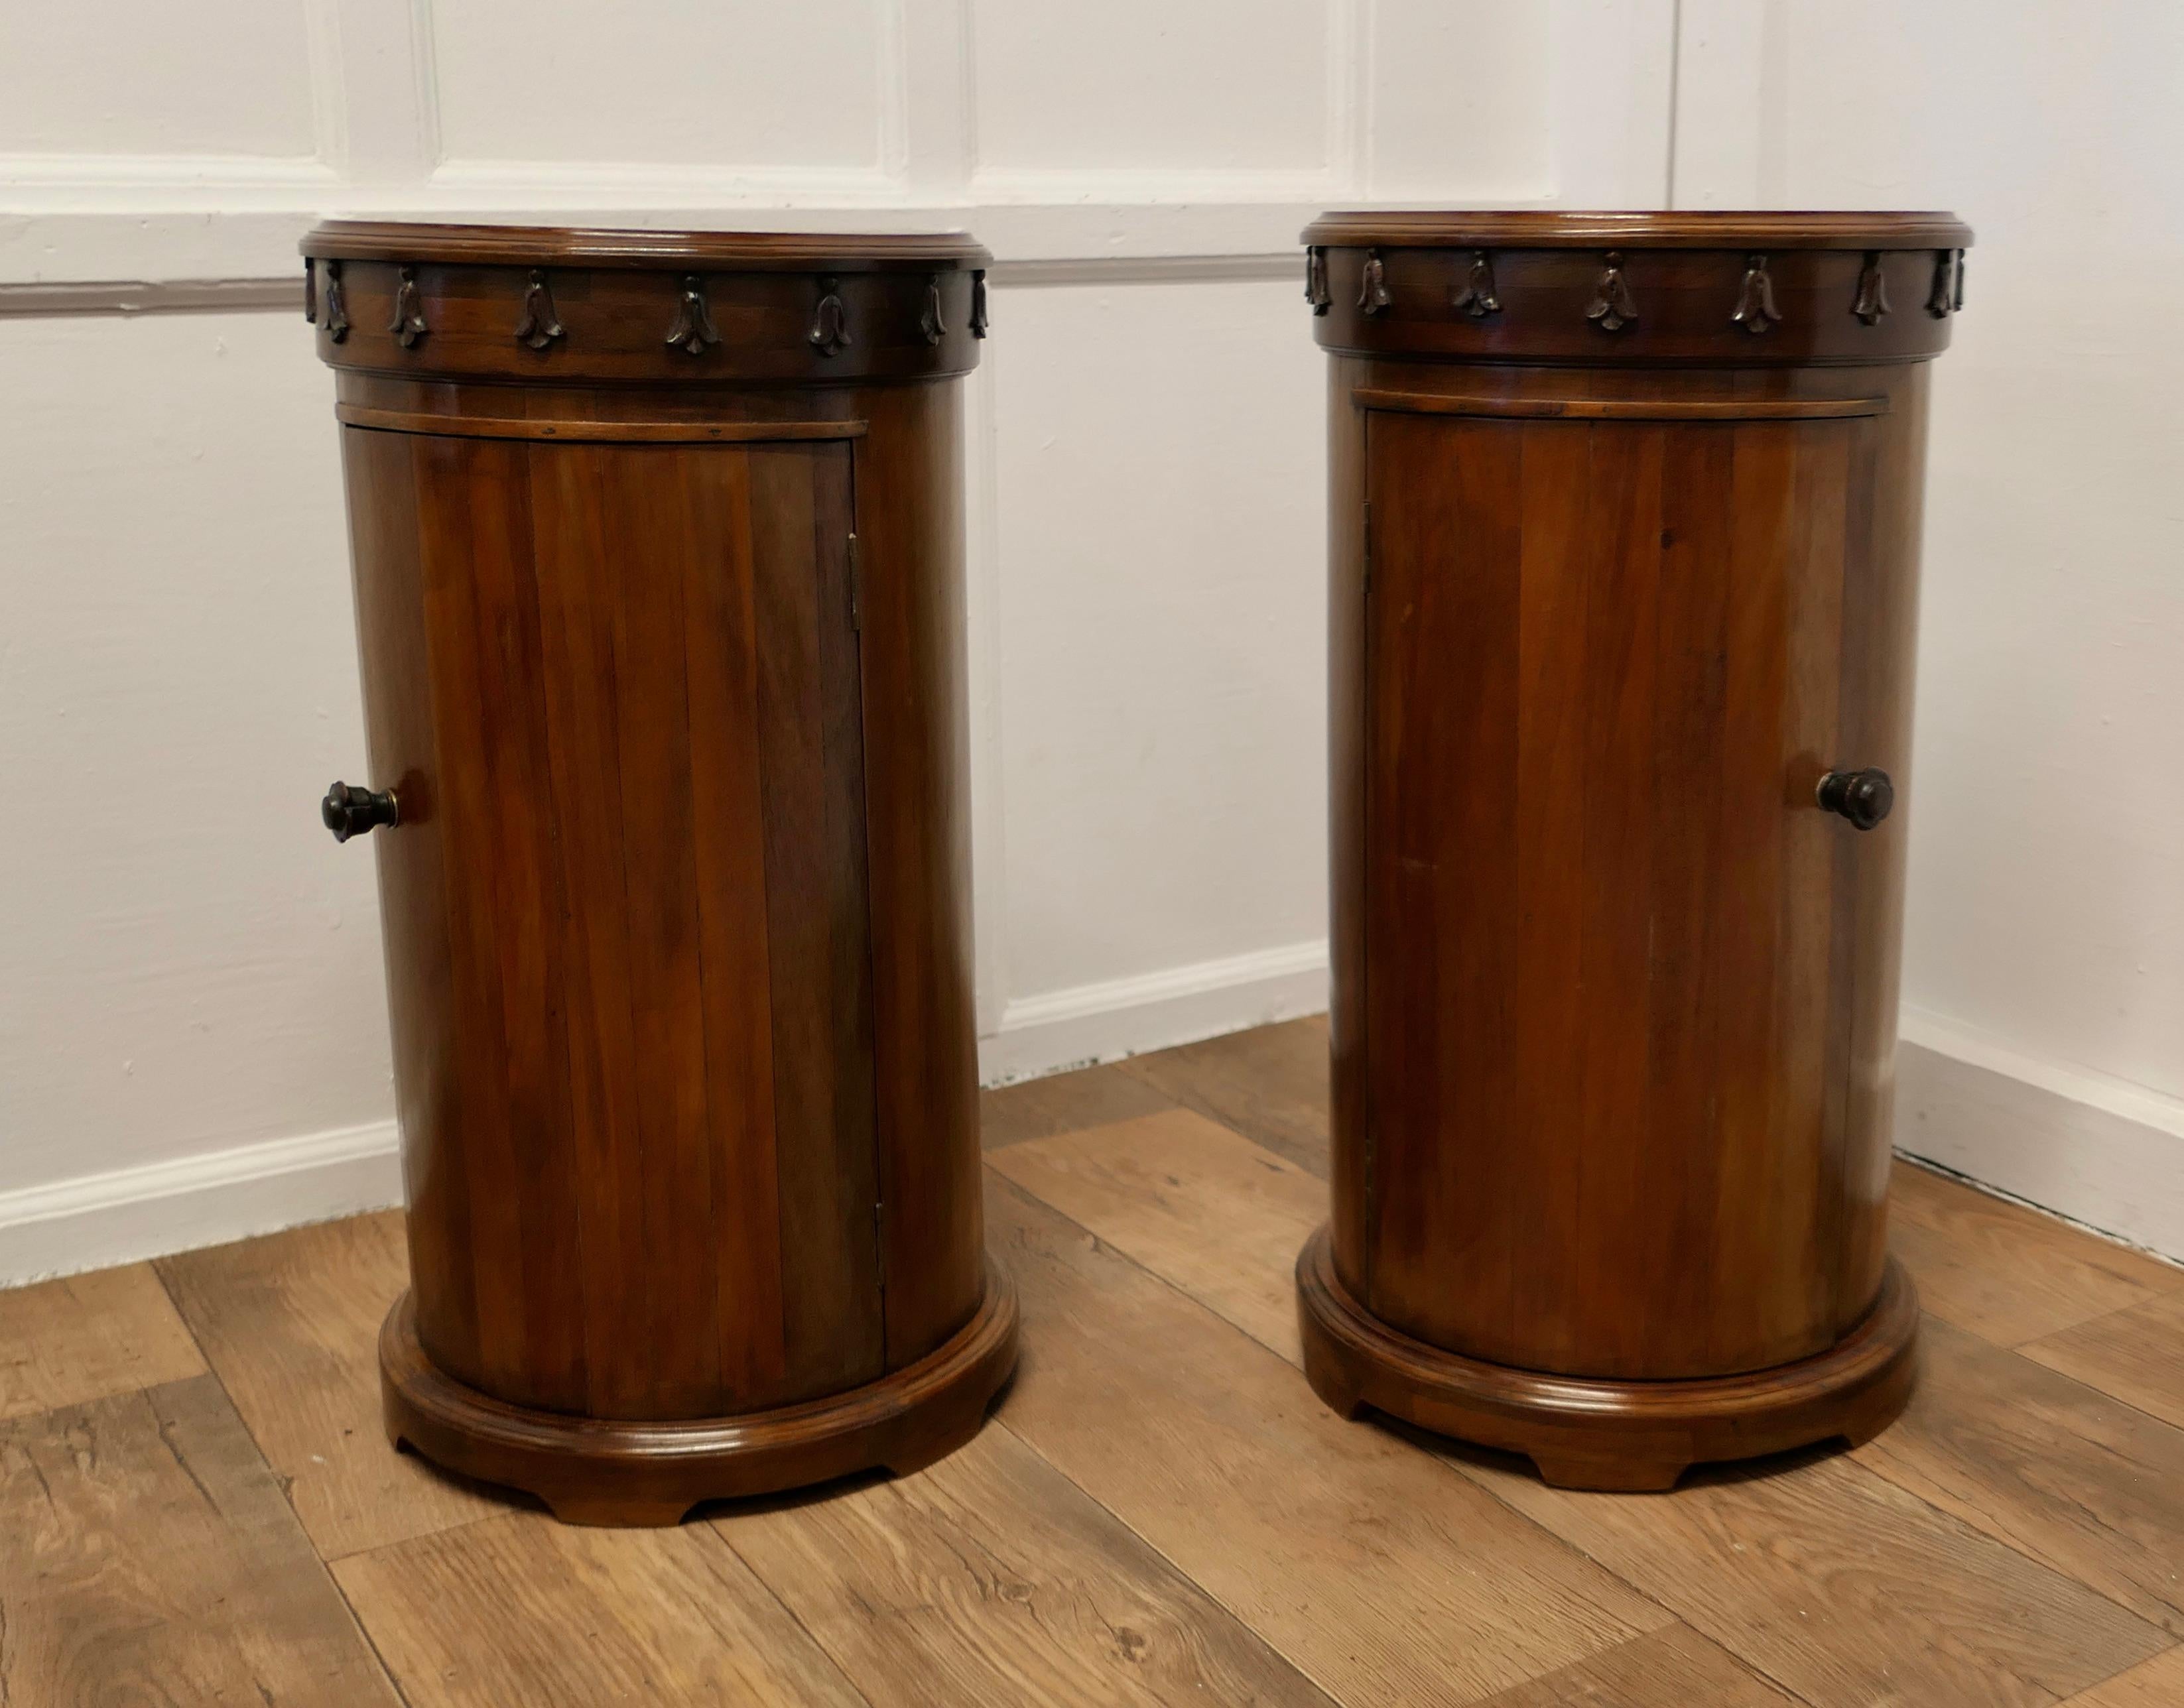 A Pair of Round Side Cabinets or Night Stands

This is a good quality pair of Circular Cabinets they each have a very decorative apron around the moulded top edge and are shelved inside
The Cabinets are very attractive, they are in good